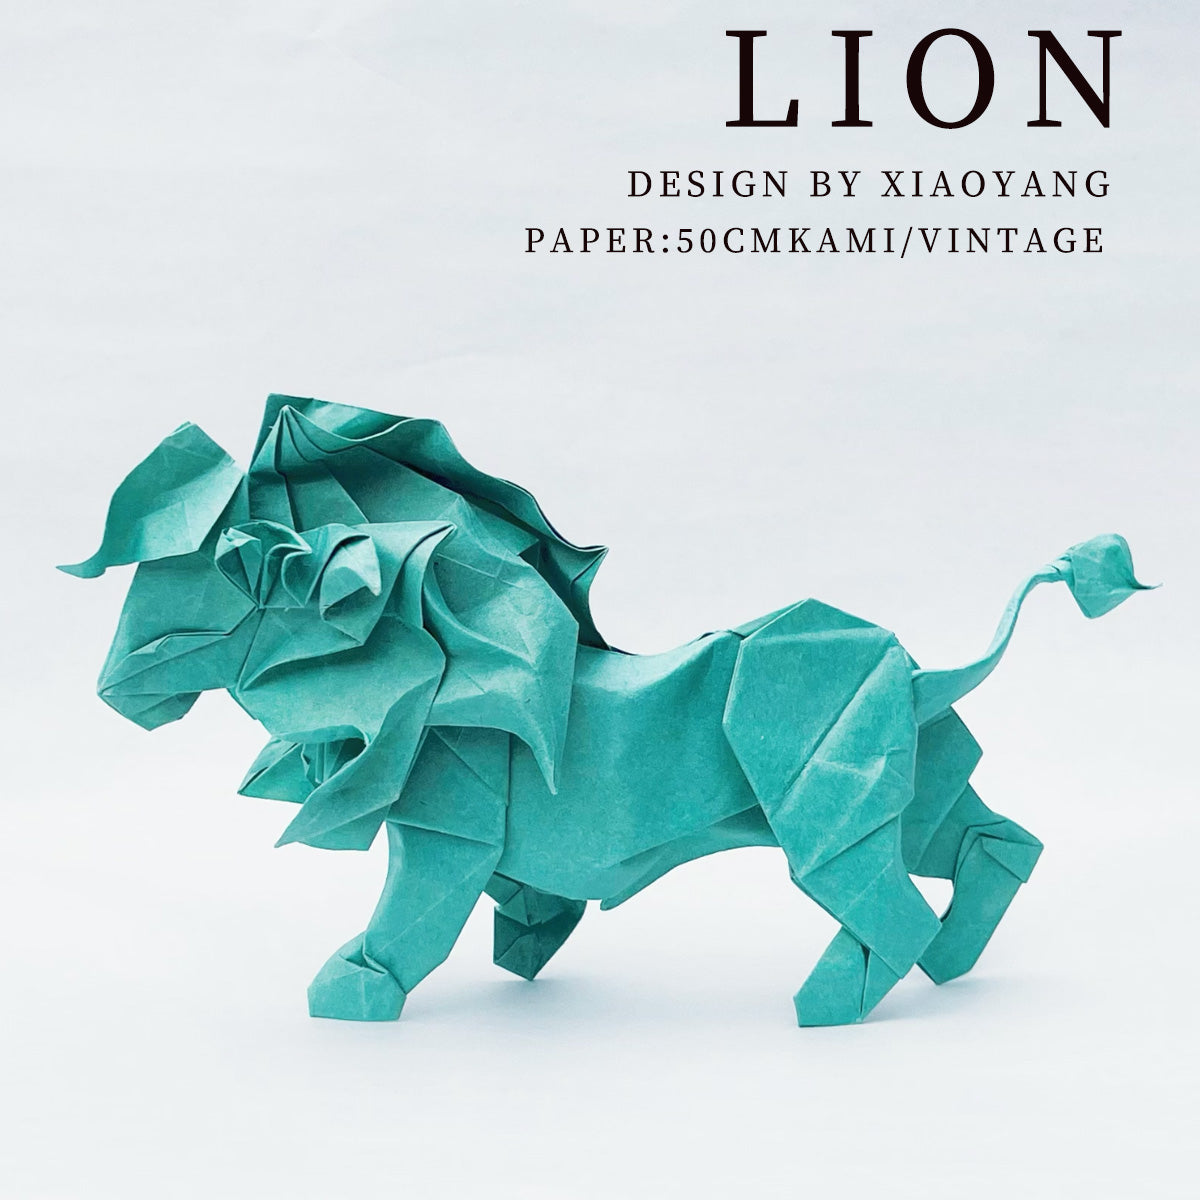 lion photodiagrams by Xiaoyang